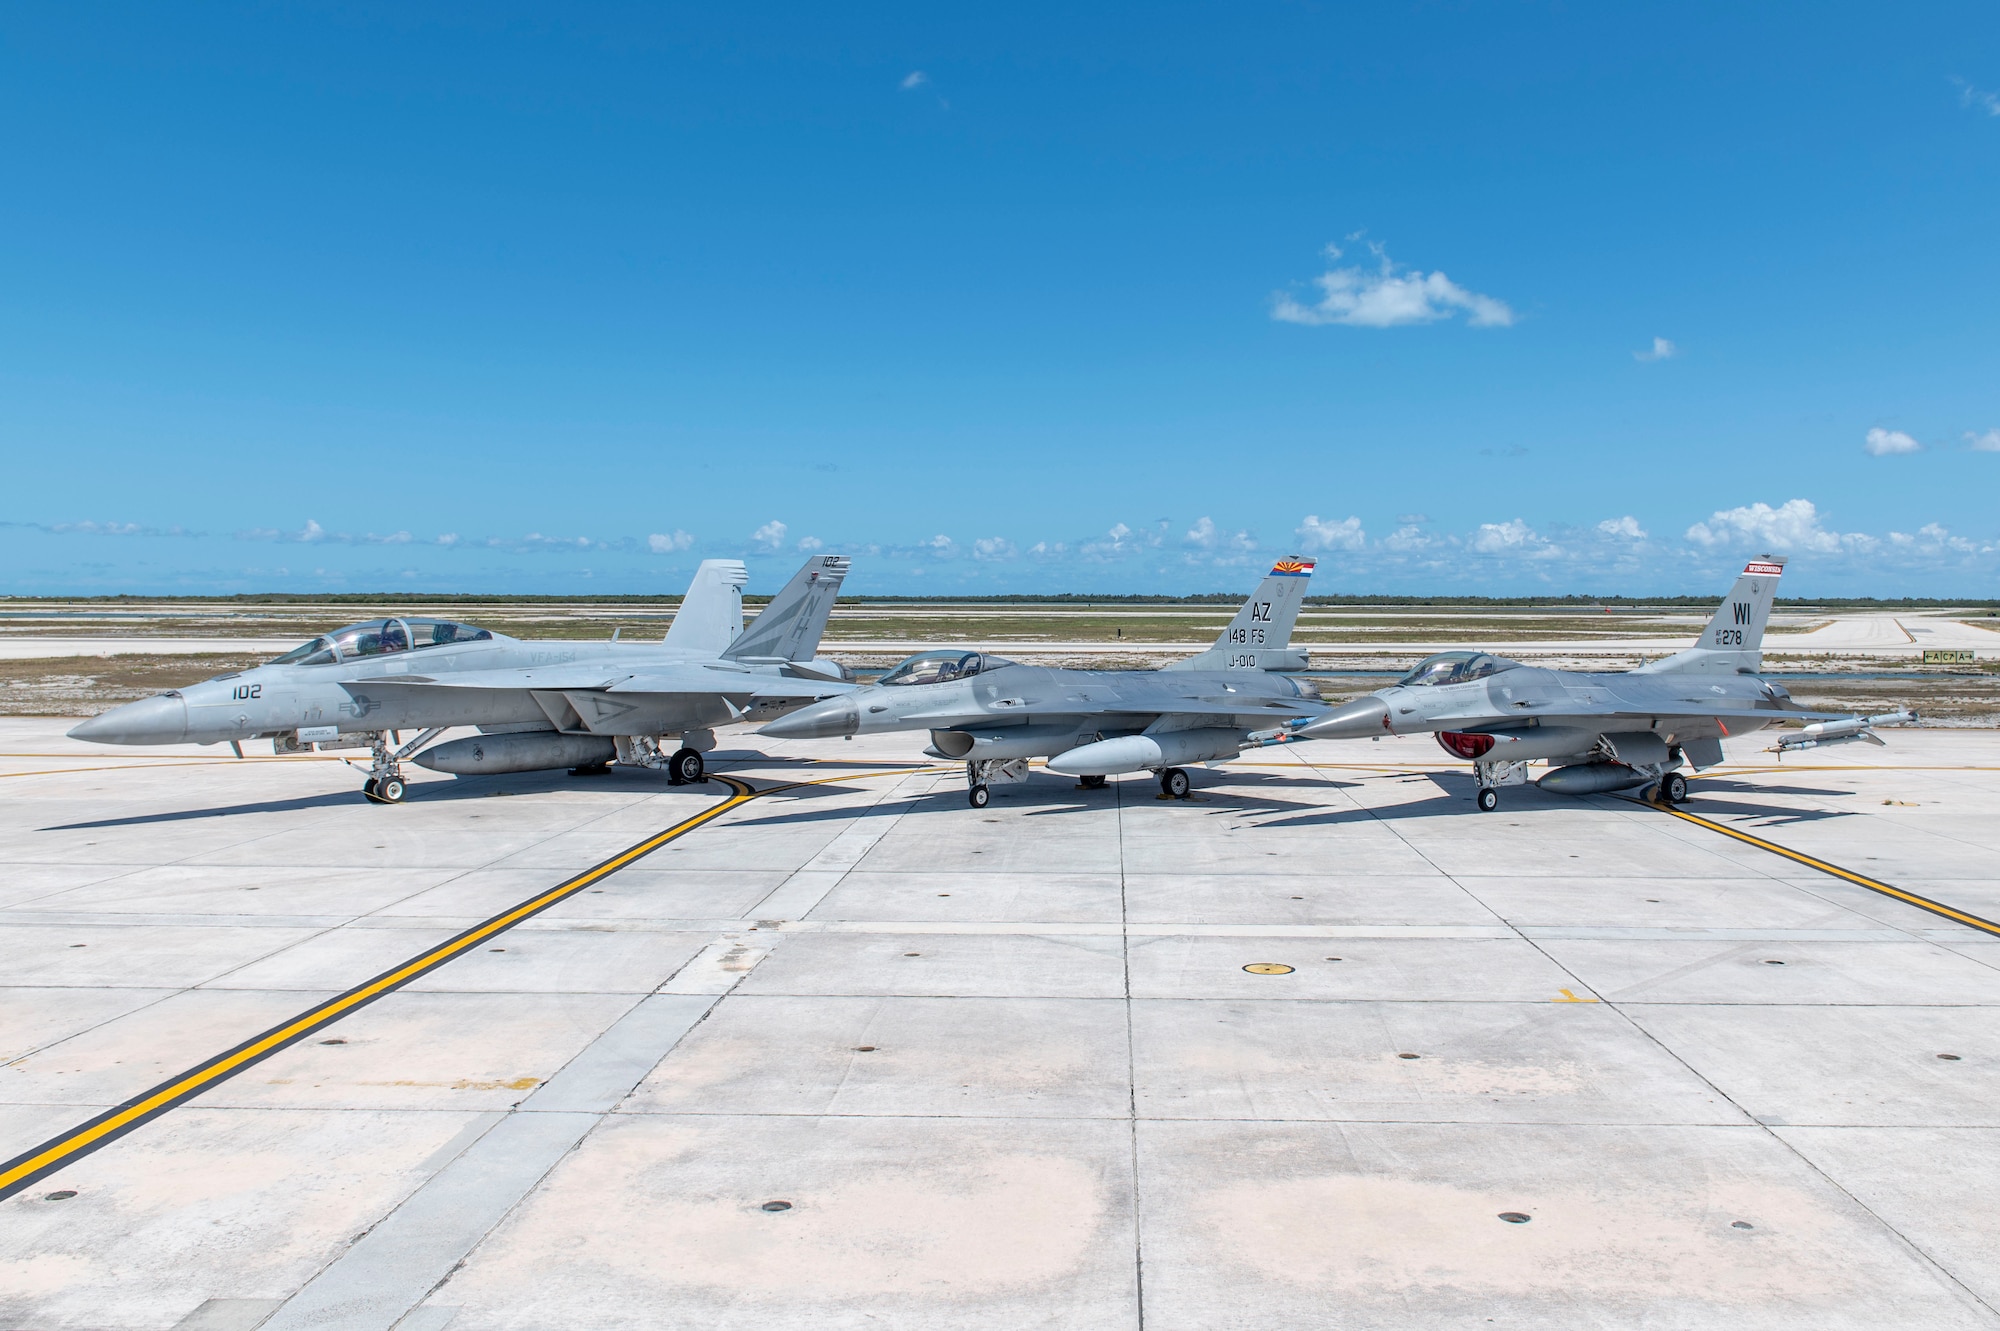 Joint U.S. military fighter jet aircraft are parked together on the flight line.